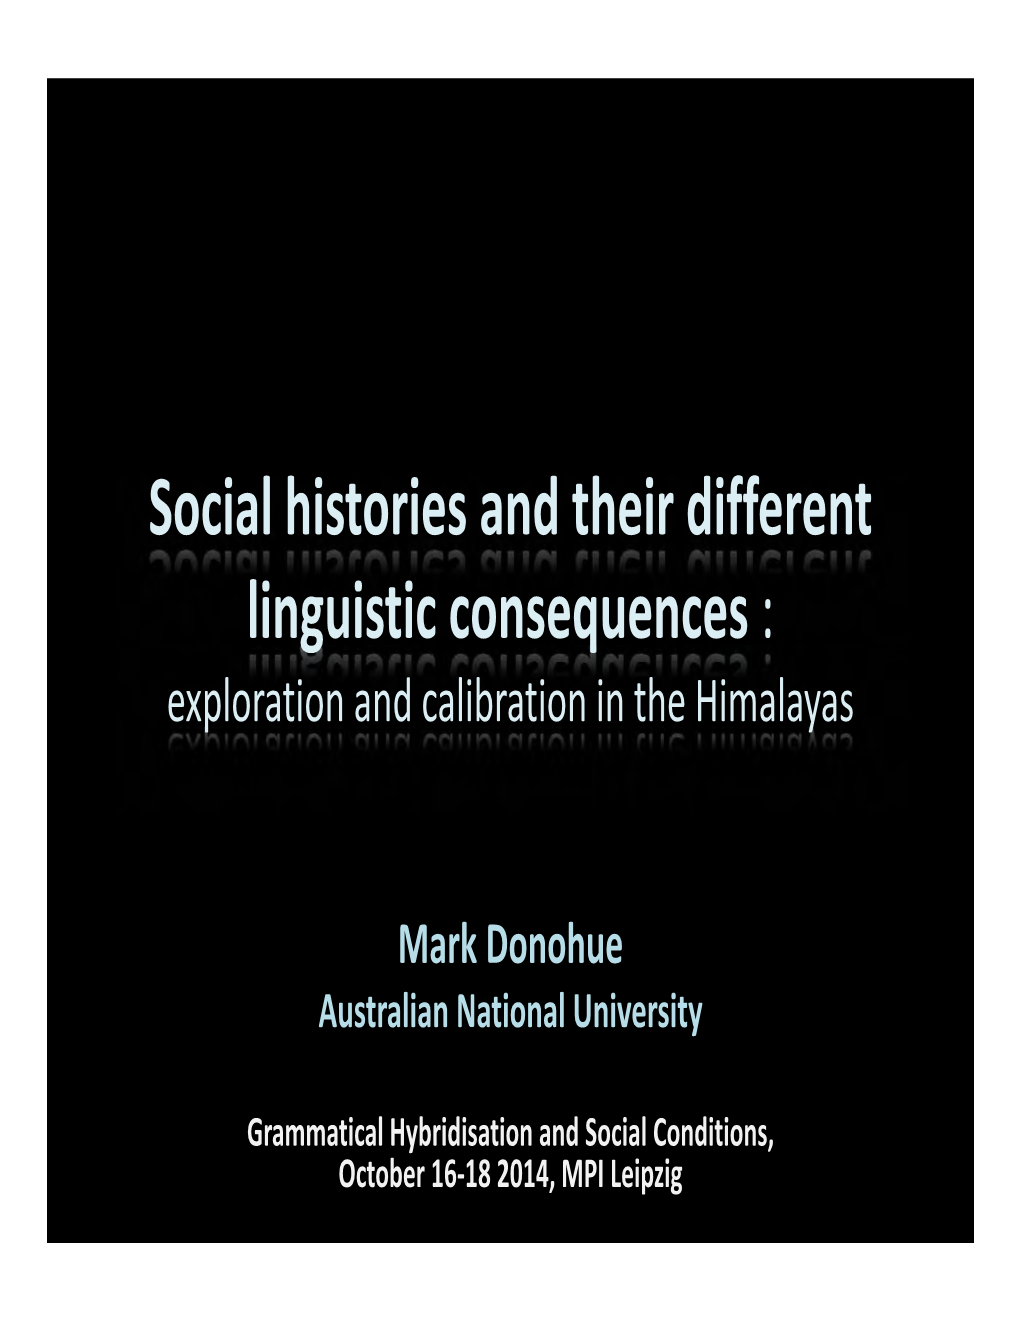 Social Histories and Their Different Linguistic Consequences : Exploration and Calibration in the Himalayas